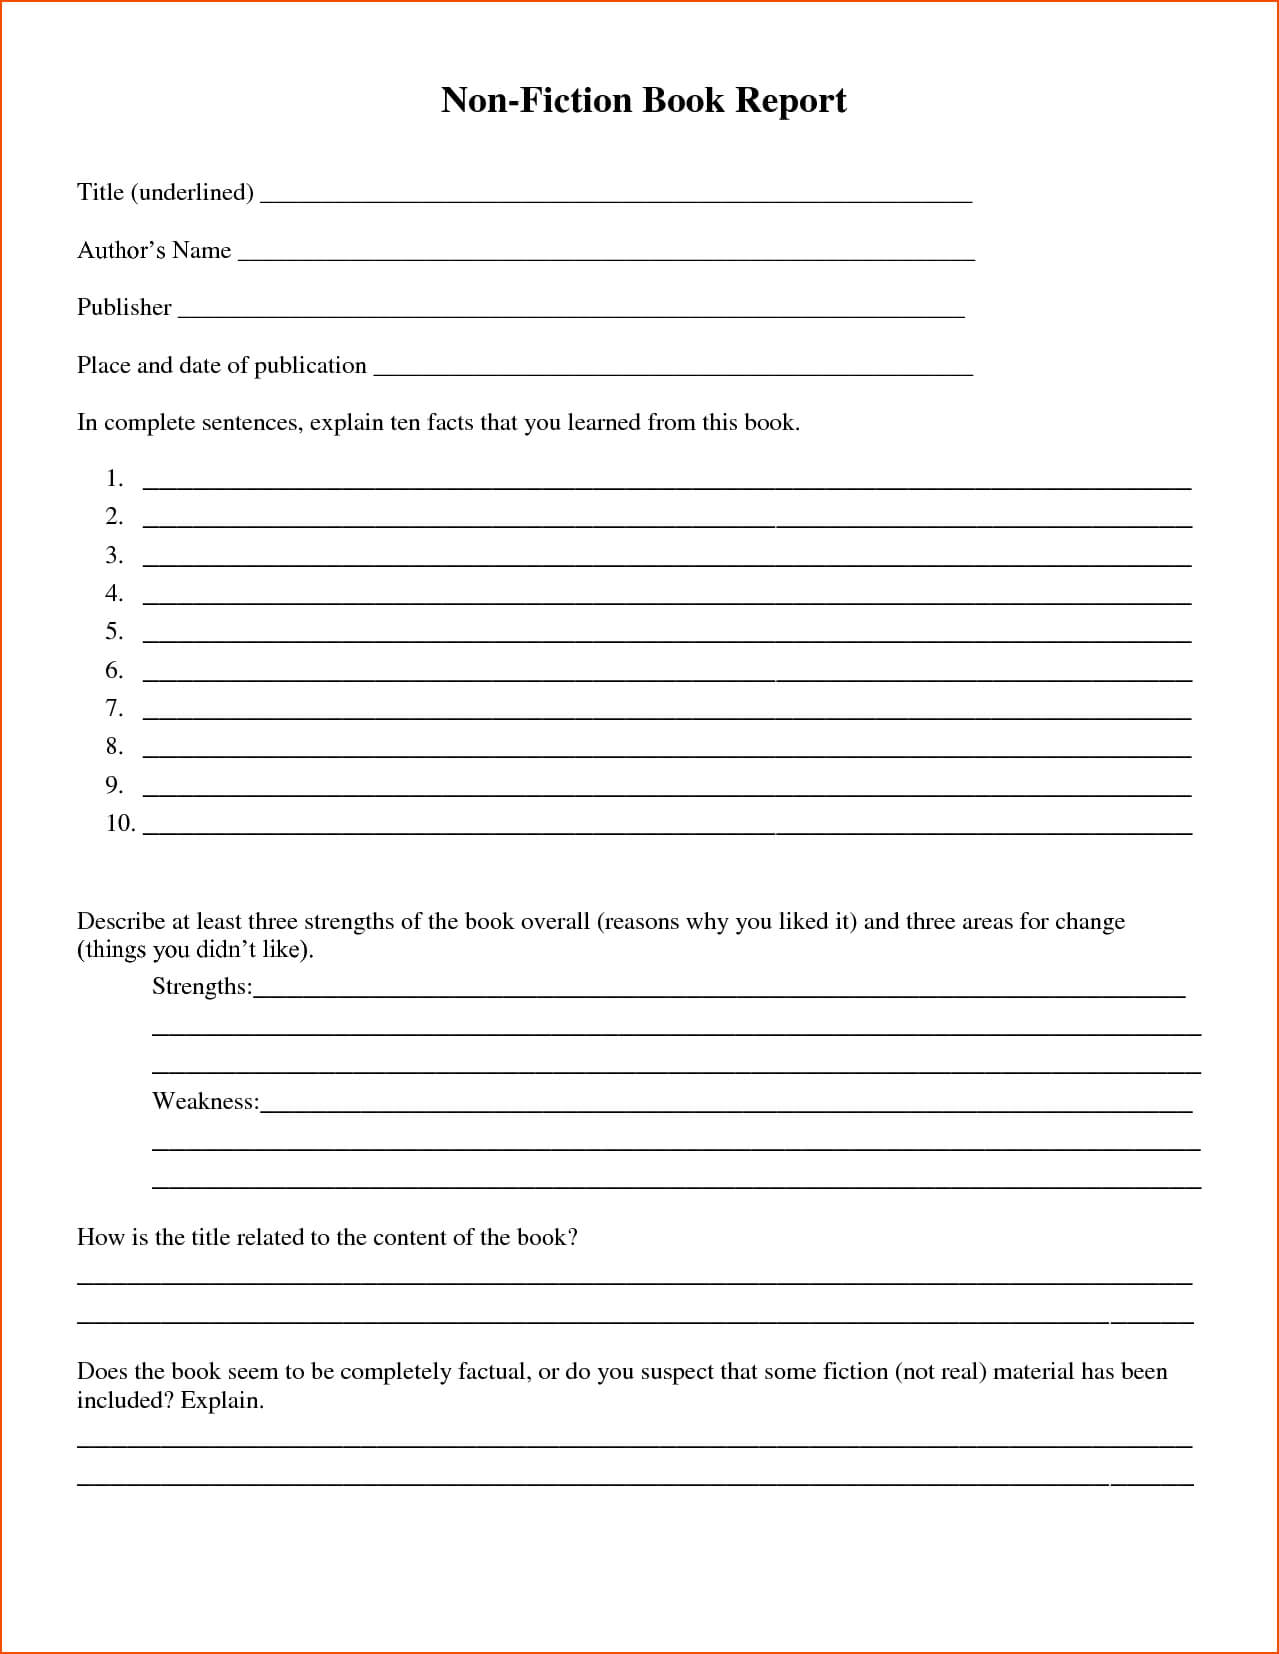 Fiction Book Report Template 6Th Grade For 7Th Graders Pdf For Nonfiction Book Report Template